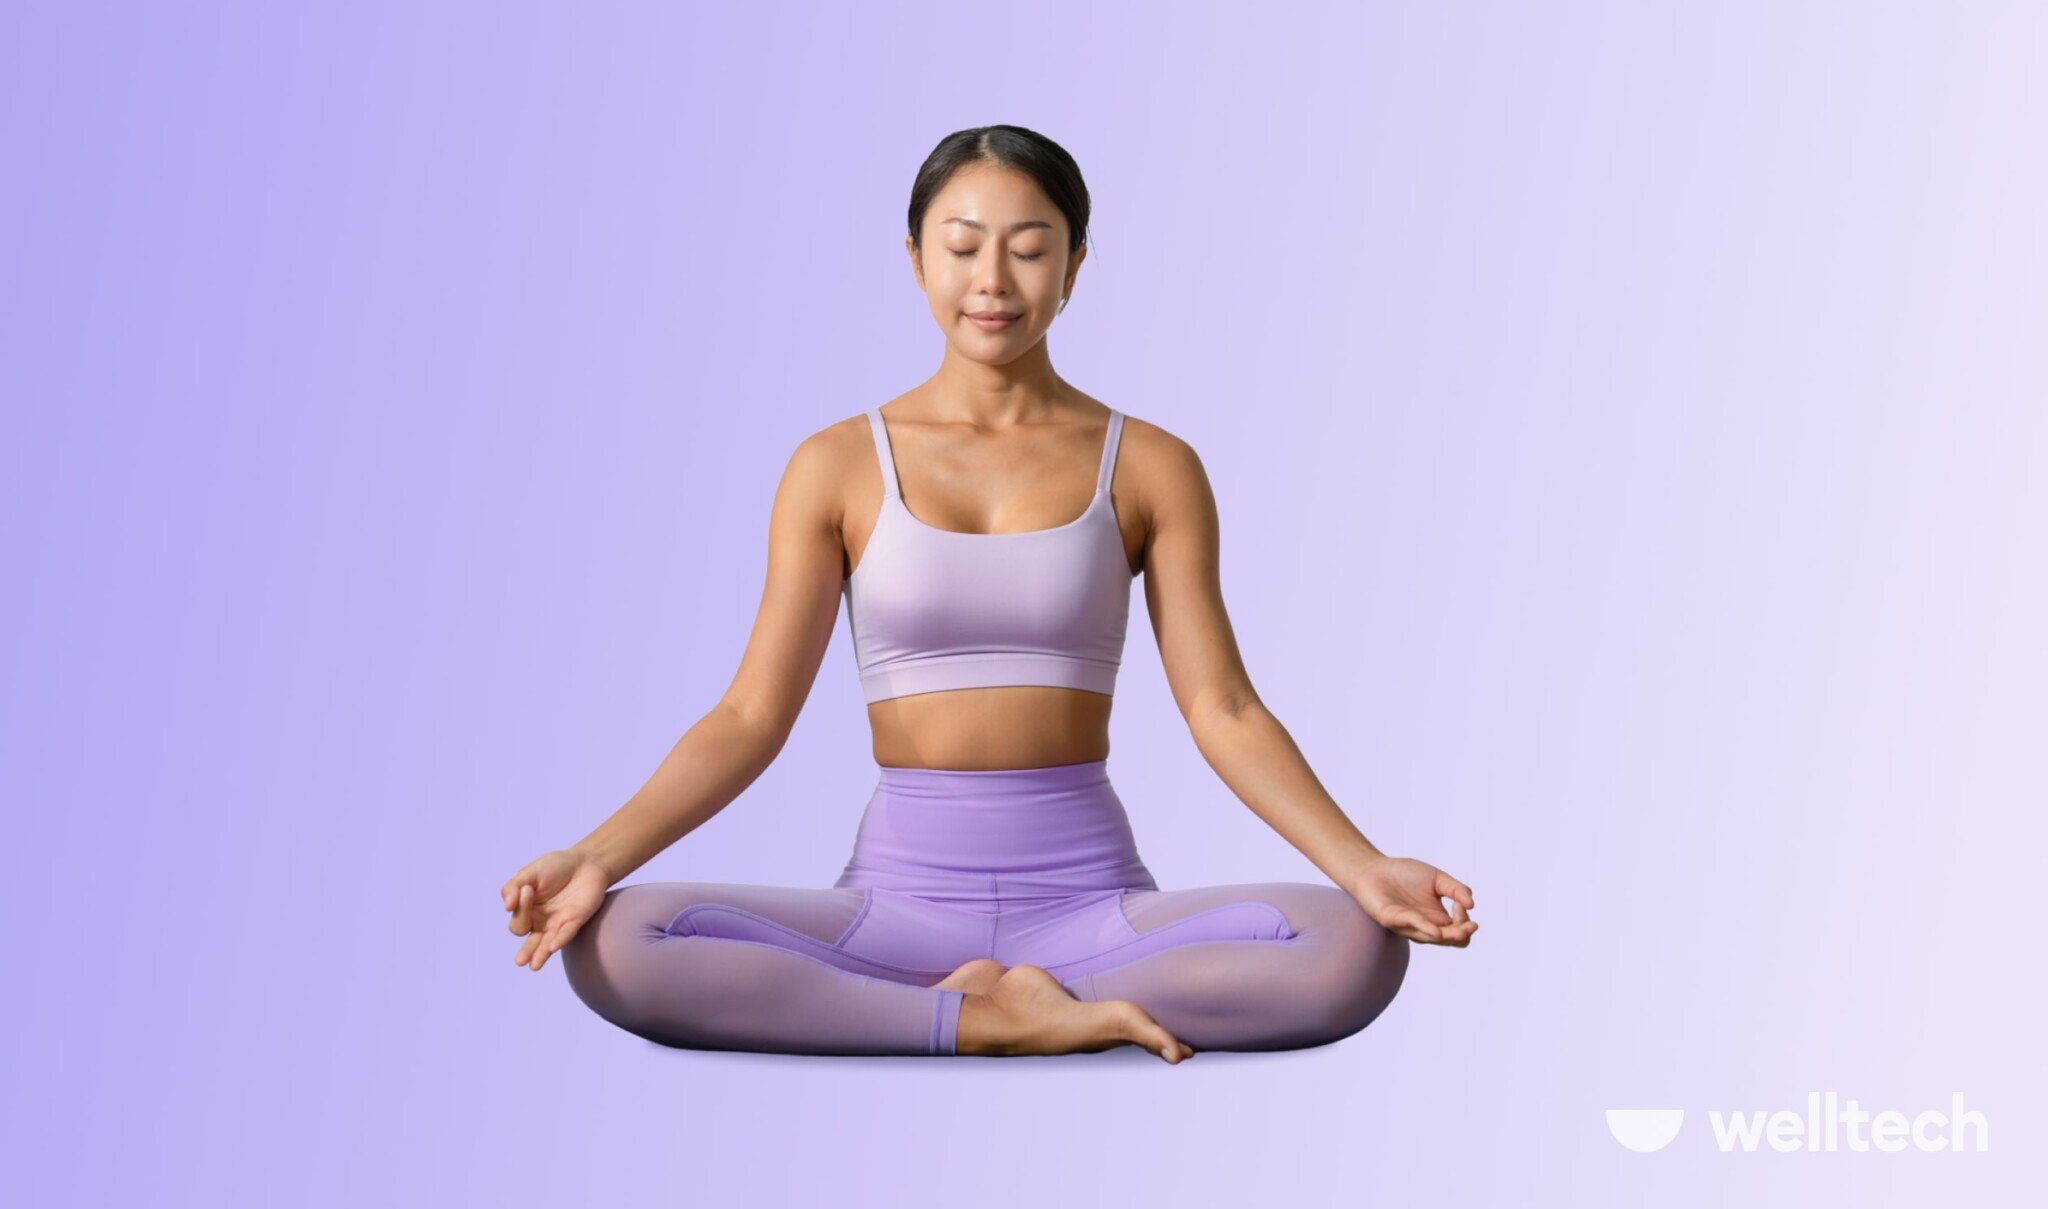 Seated Yoga Poses Sequence For Beginners Welltech